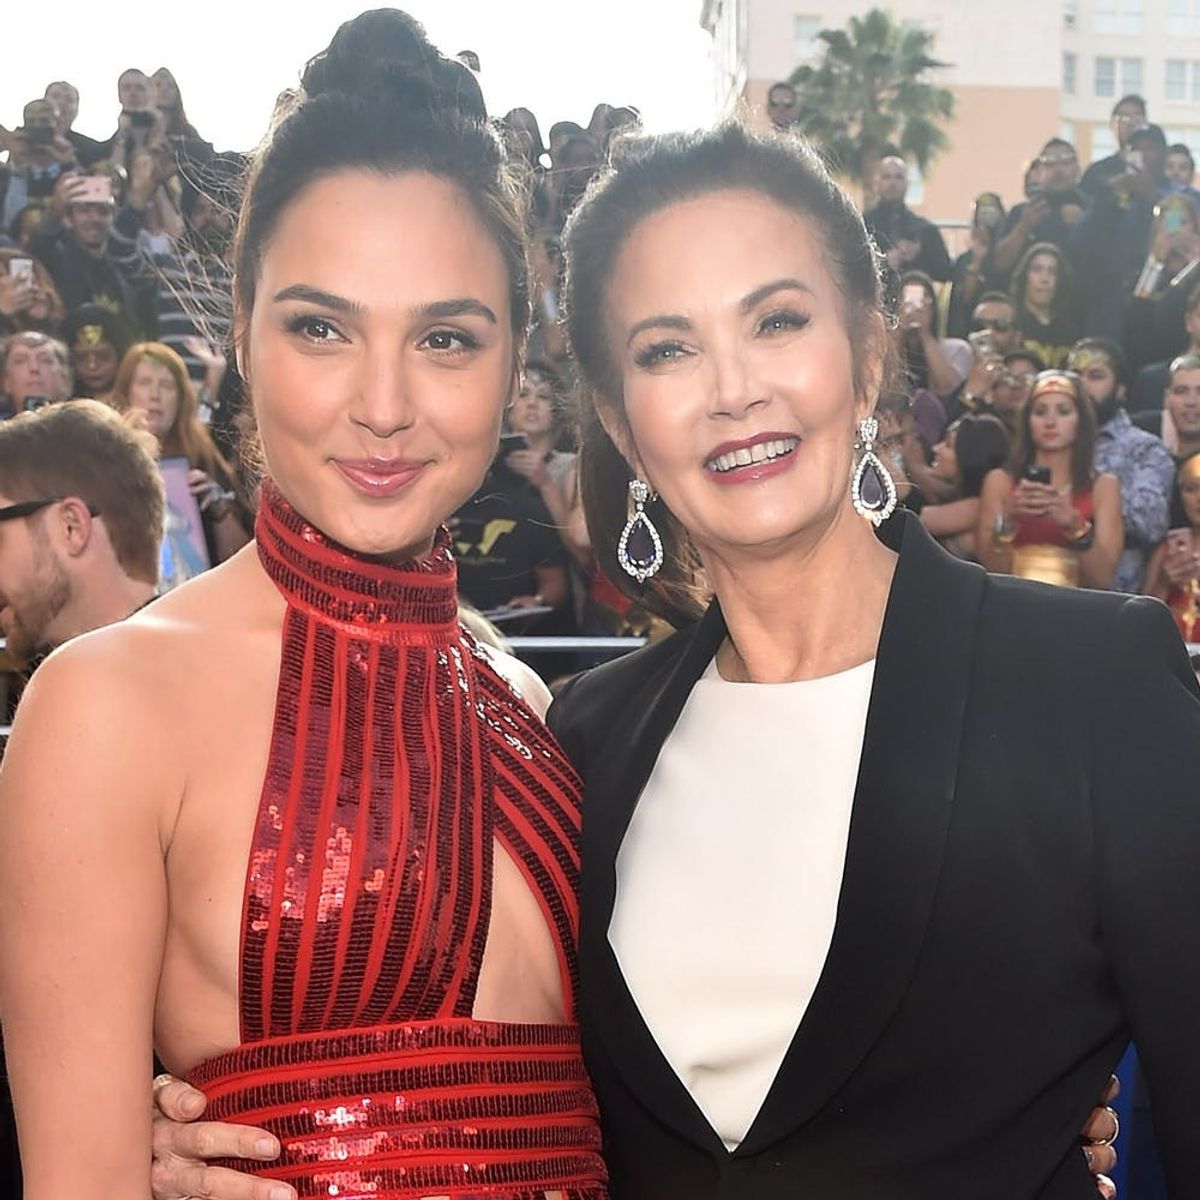 The Wonder Woman Premiere Created Controversy for a Questionable Reason